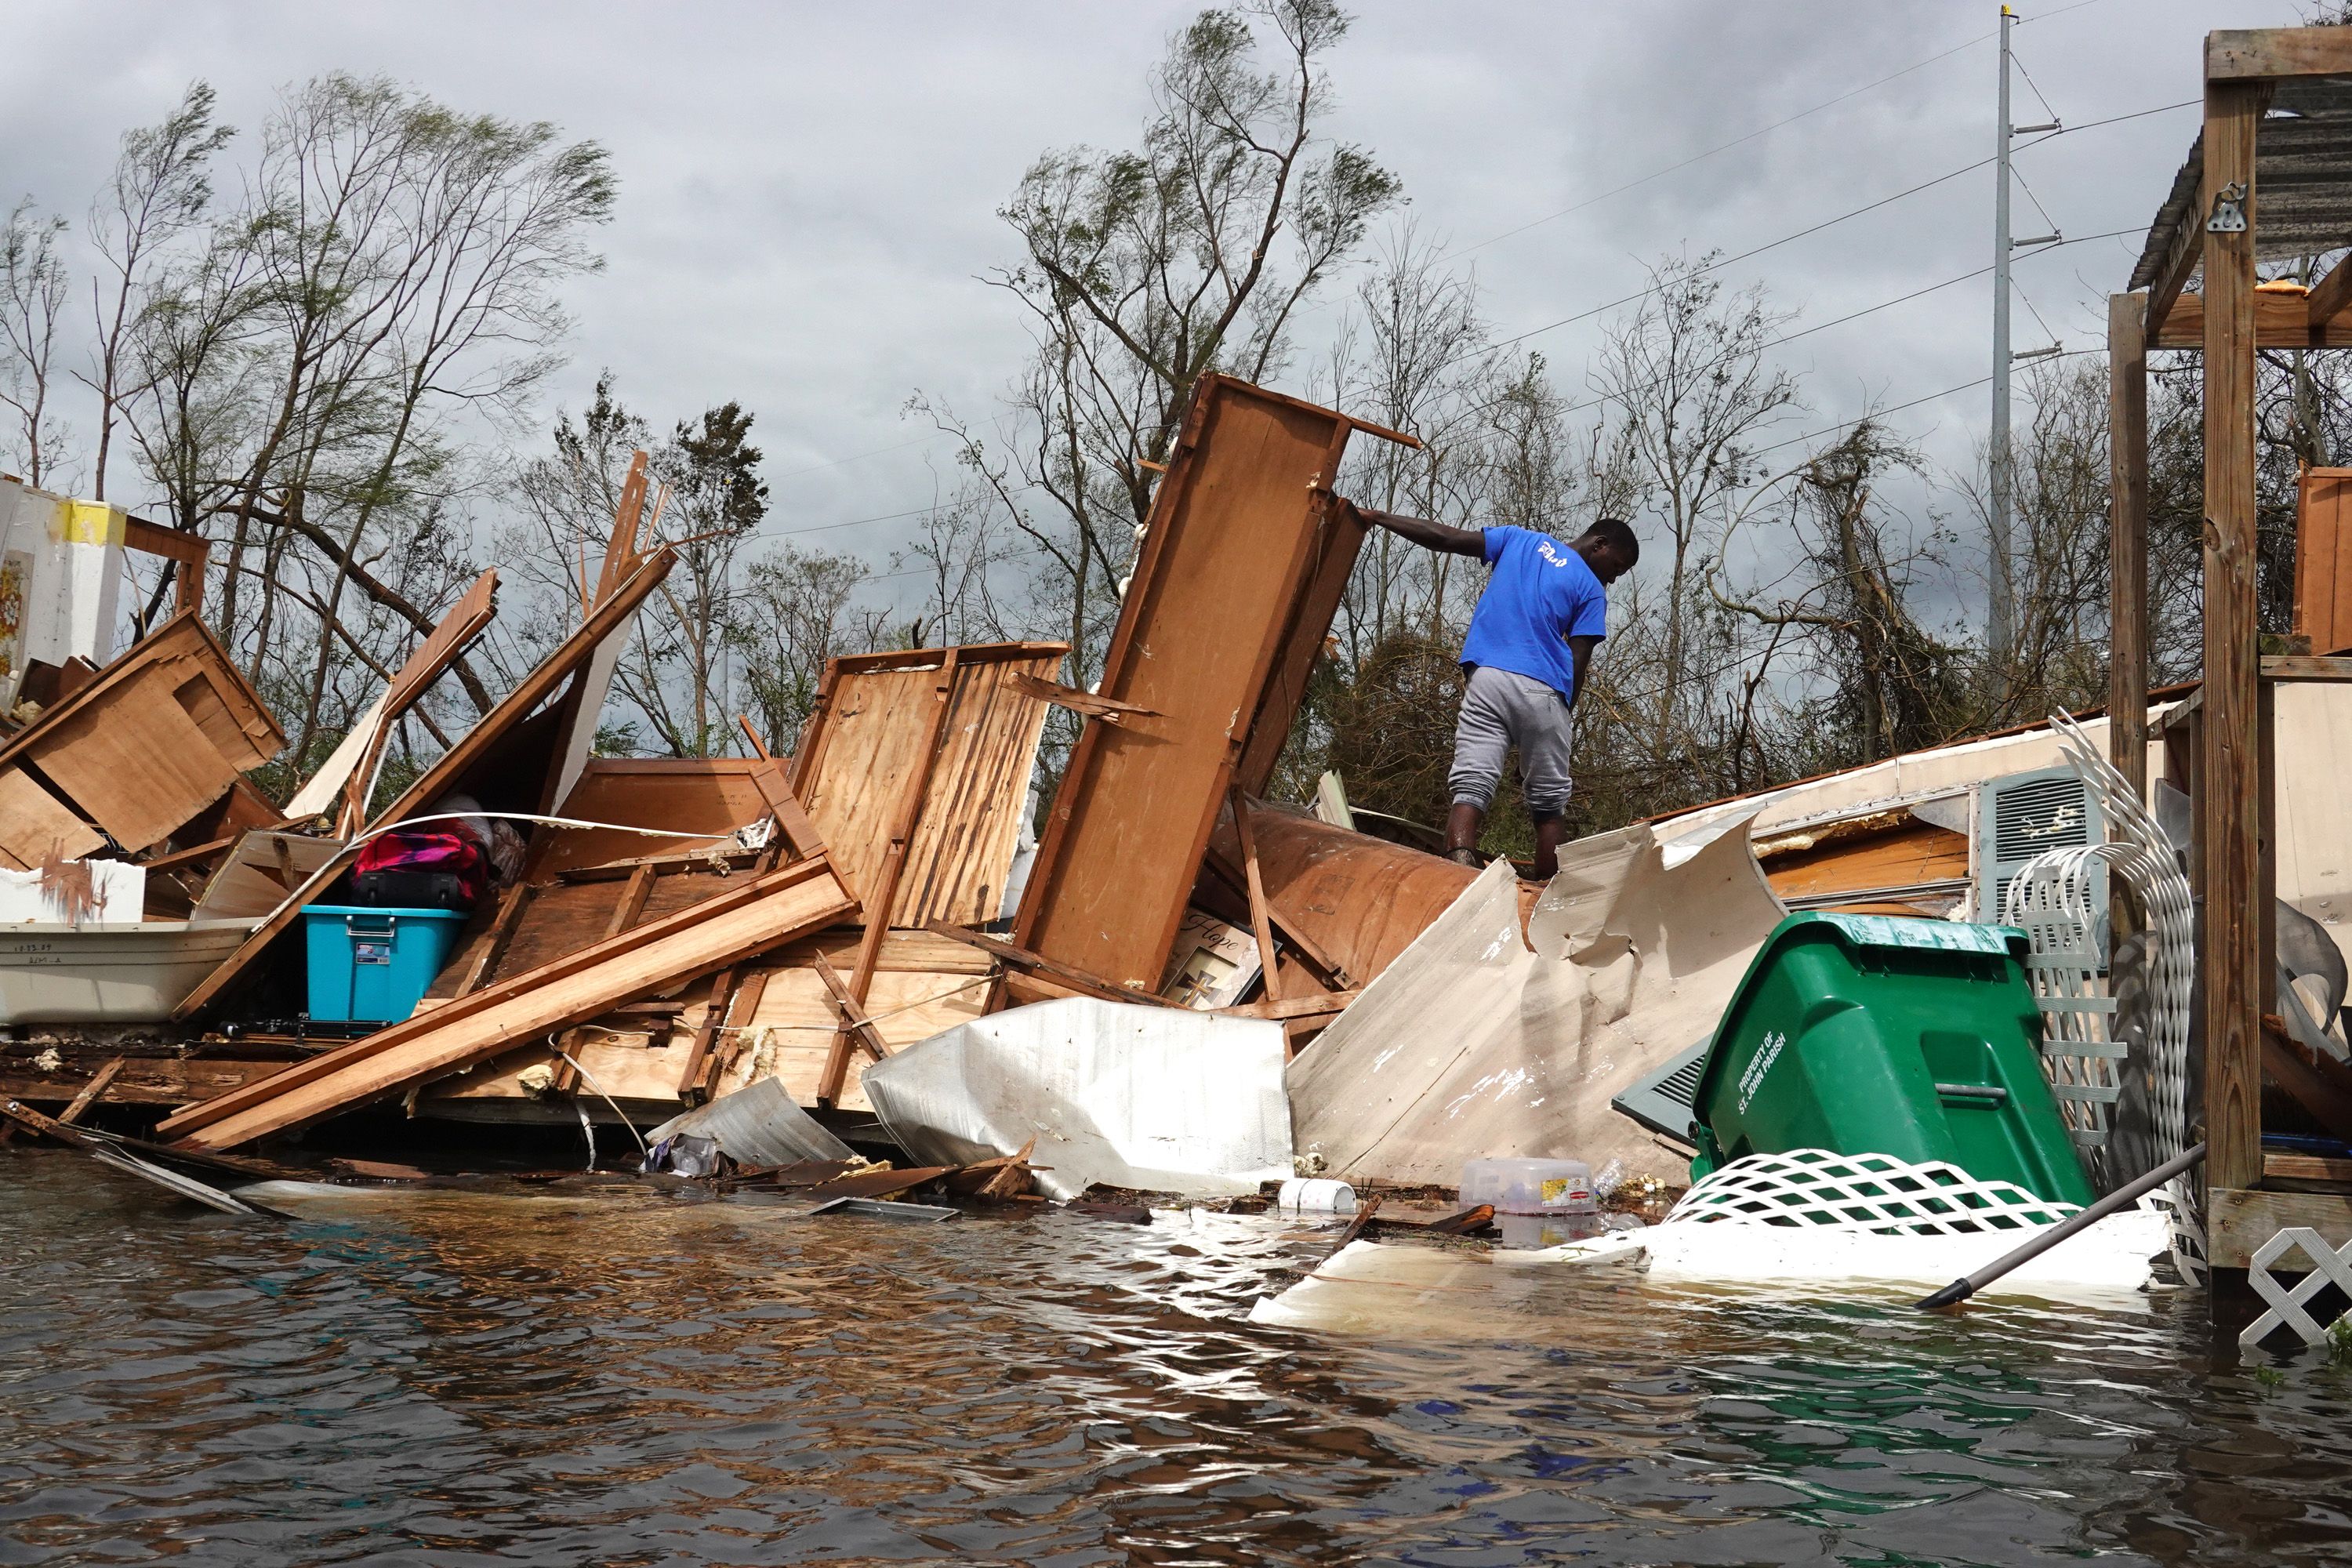 A person rescuing items from a home devastated by Hurricane Ida in LaPlace, Louisiana, in August 2021.